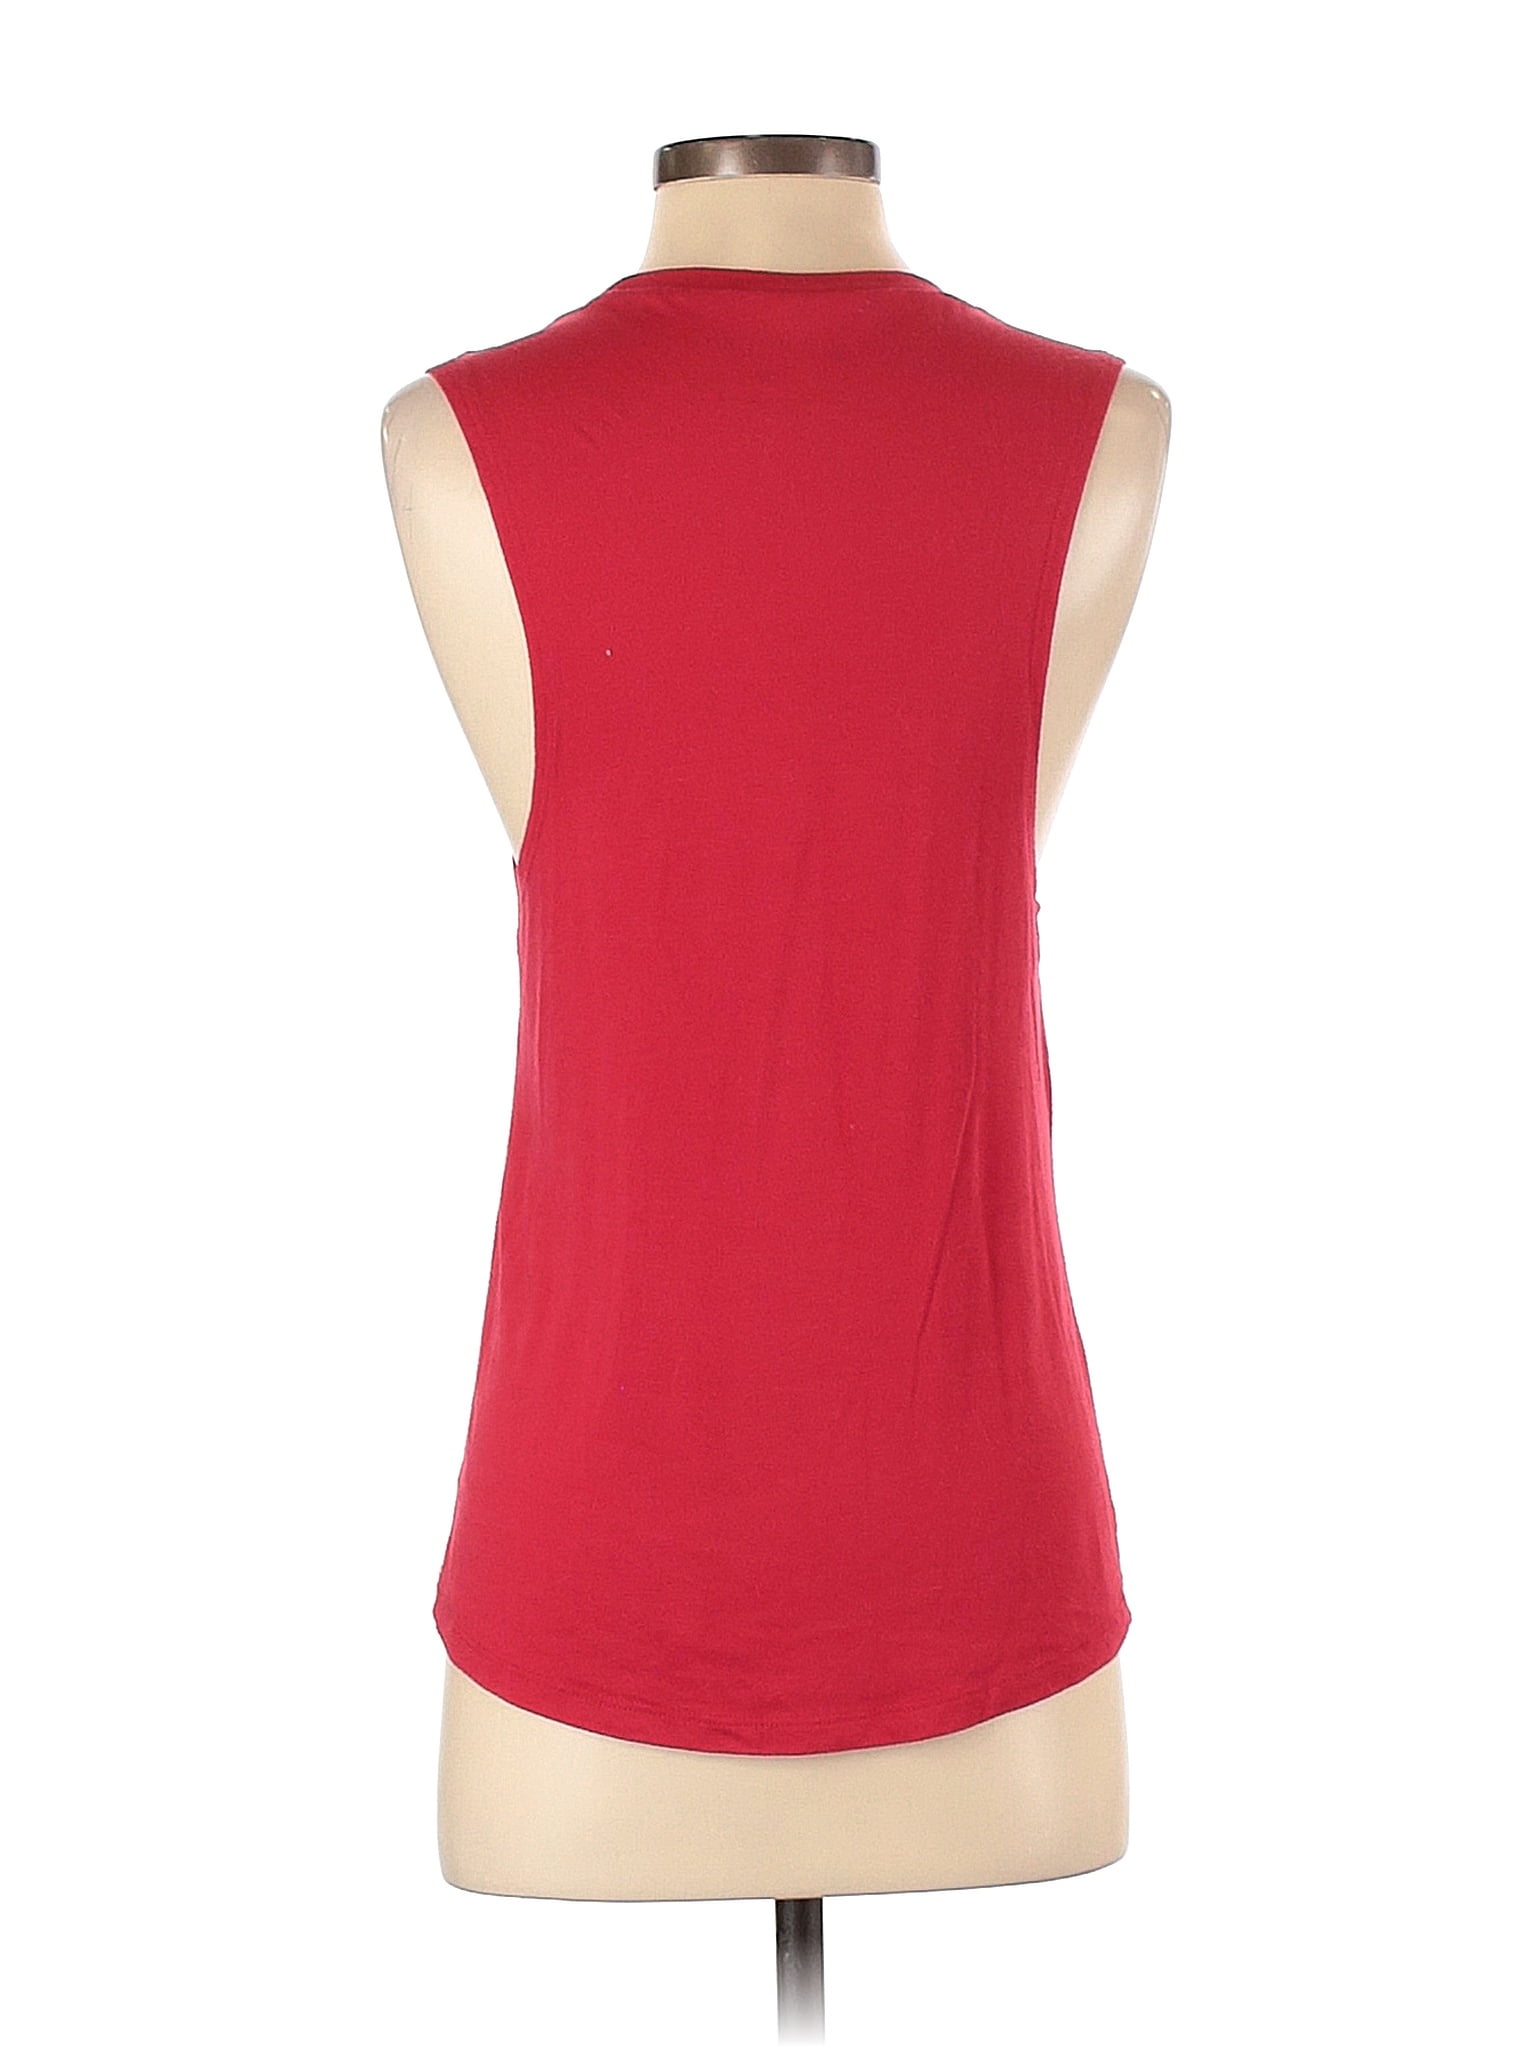 Pure Barre Graphic Solid Red Sleeveless T-Shirt Size M - 50% off